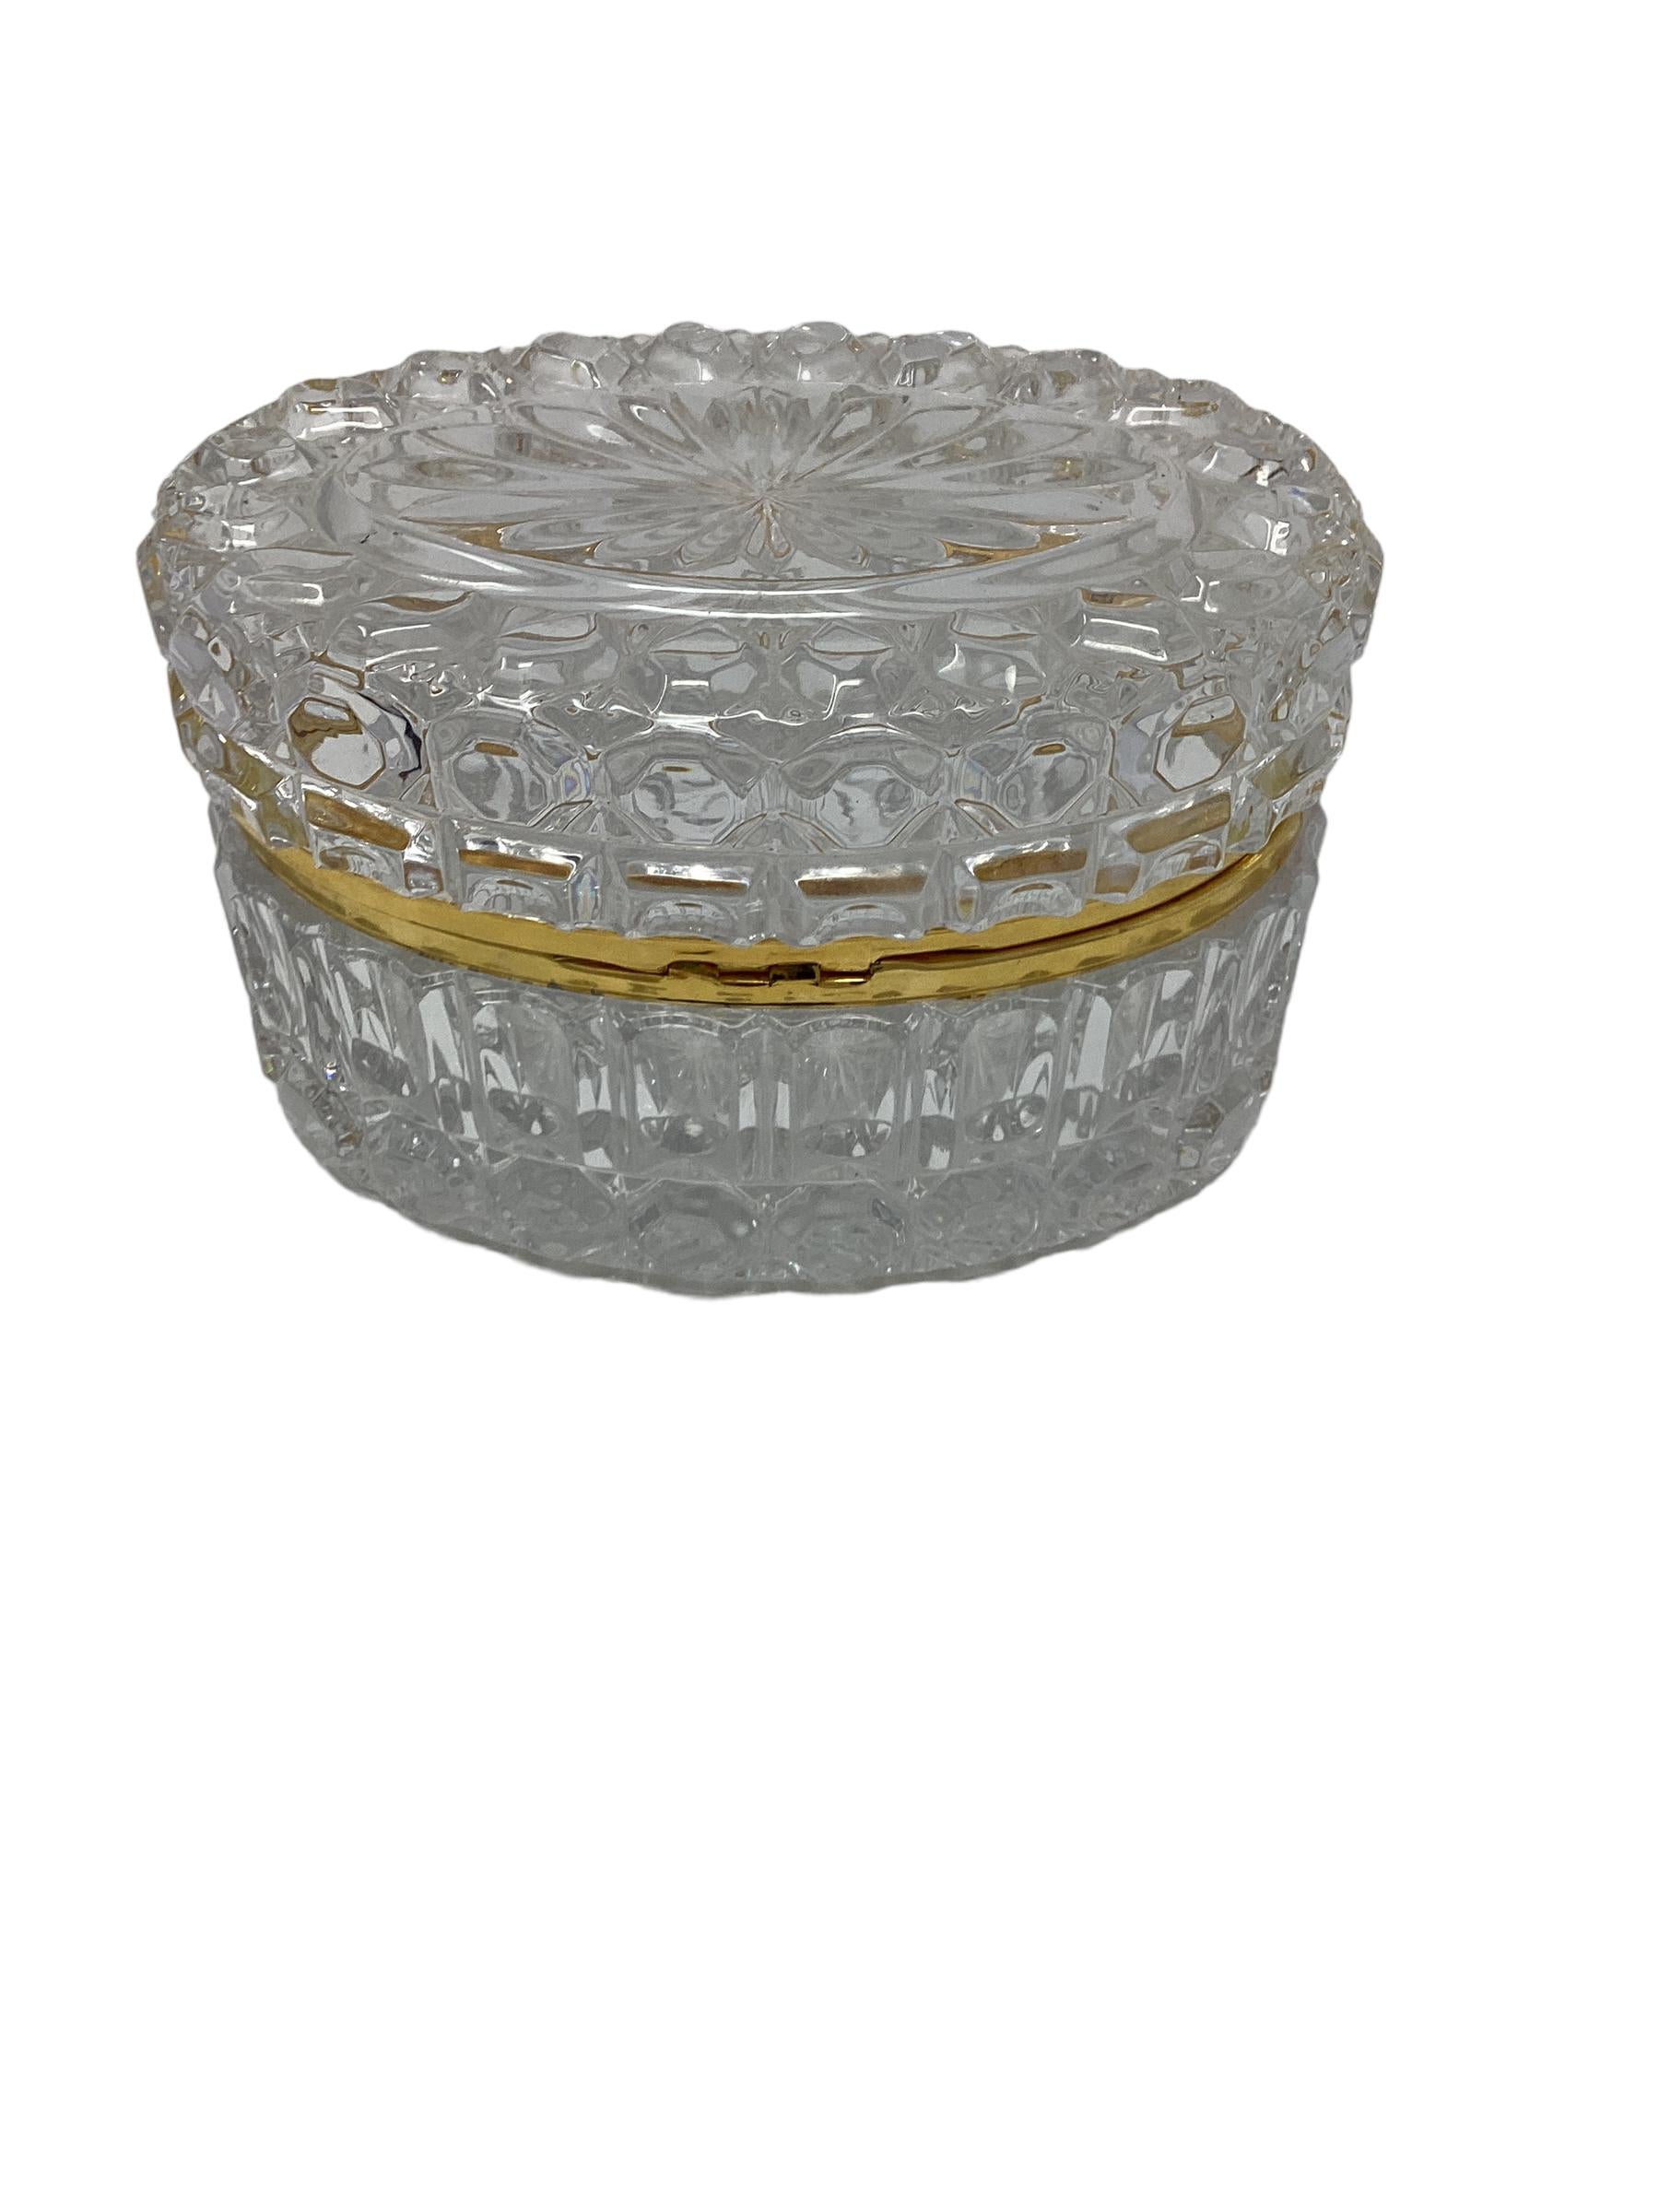 An oval molded glass jewelry box or casket. Nice large size makes it an ideal for a dresser or just for display.